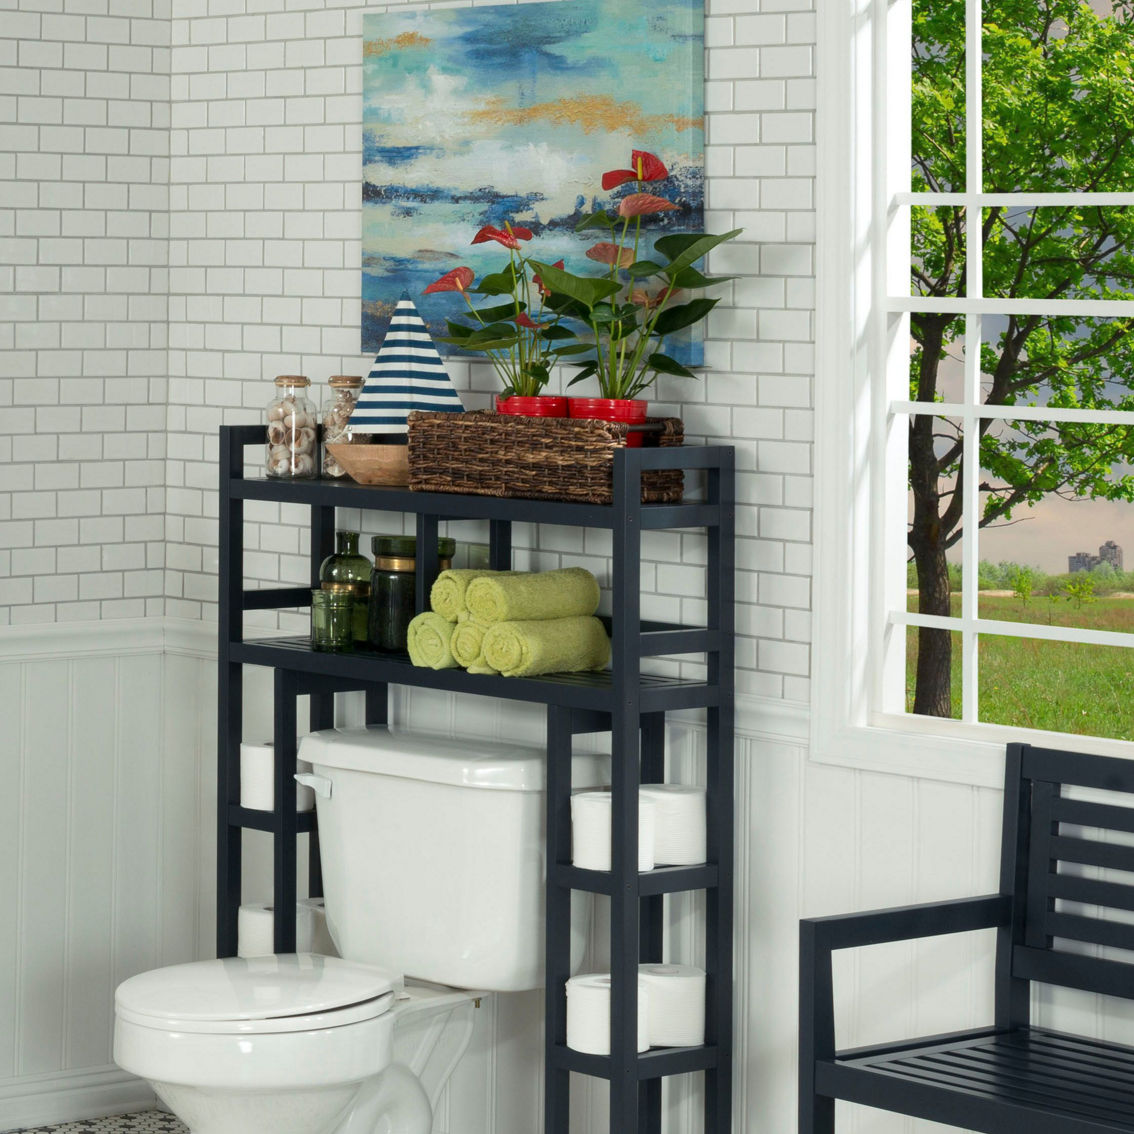 Dunnsville Solid Wood Over-Toilet Storage Space Saver with 6-Side Shelves, Espresso - Image 2 of 4